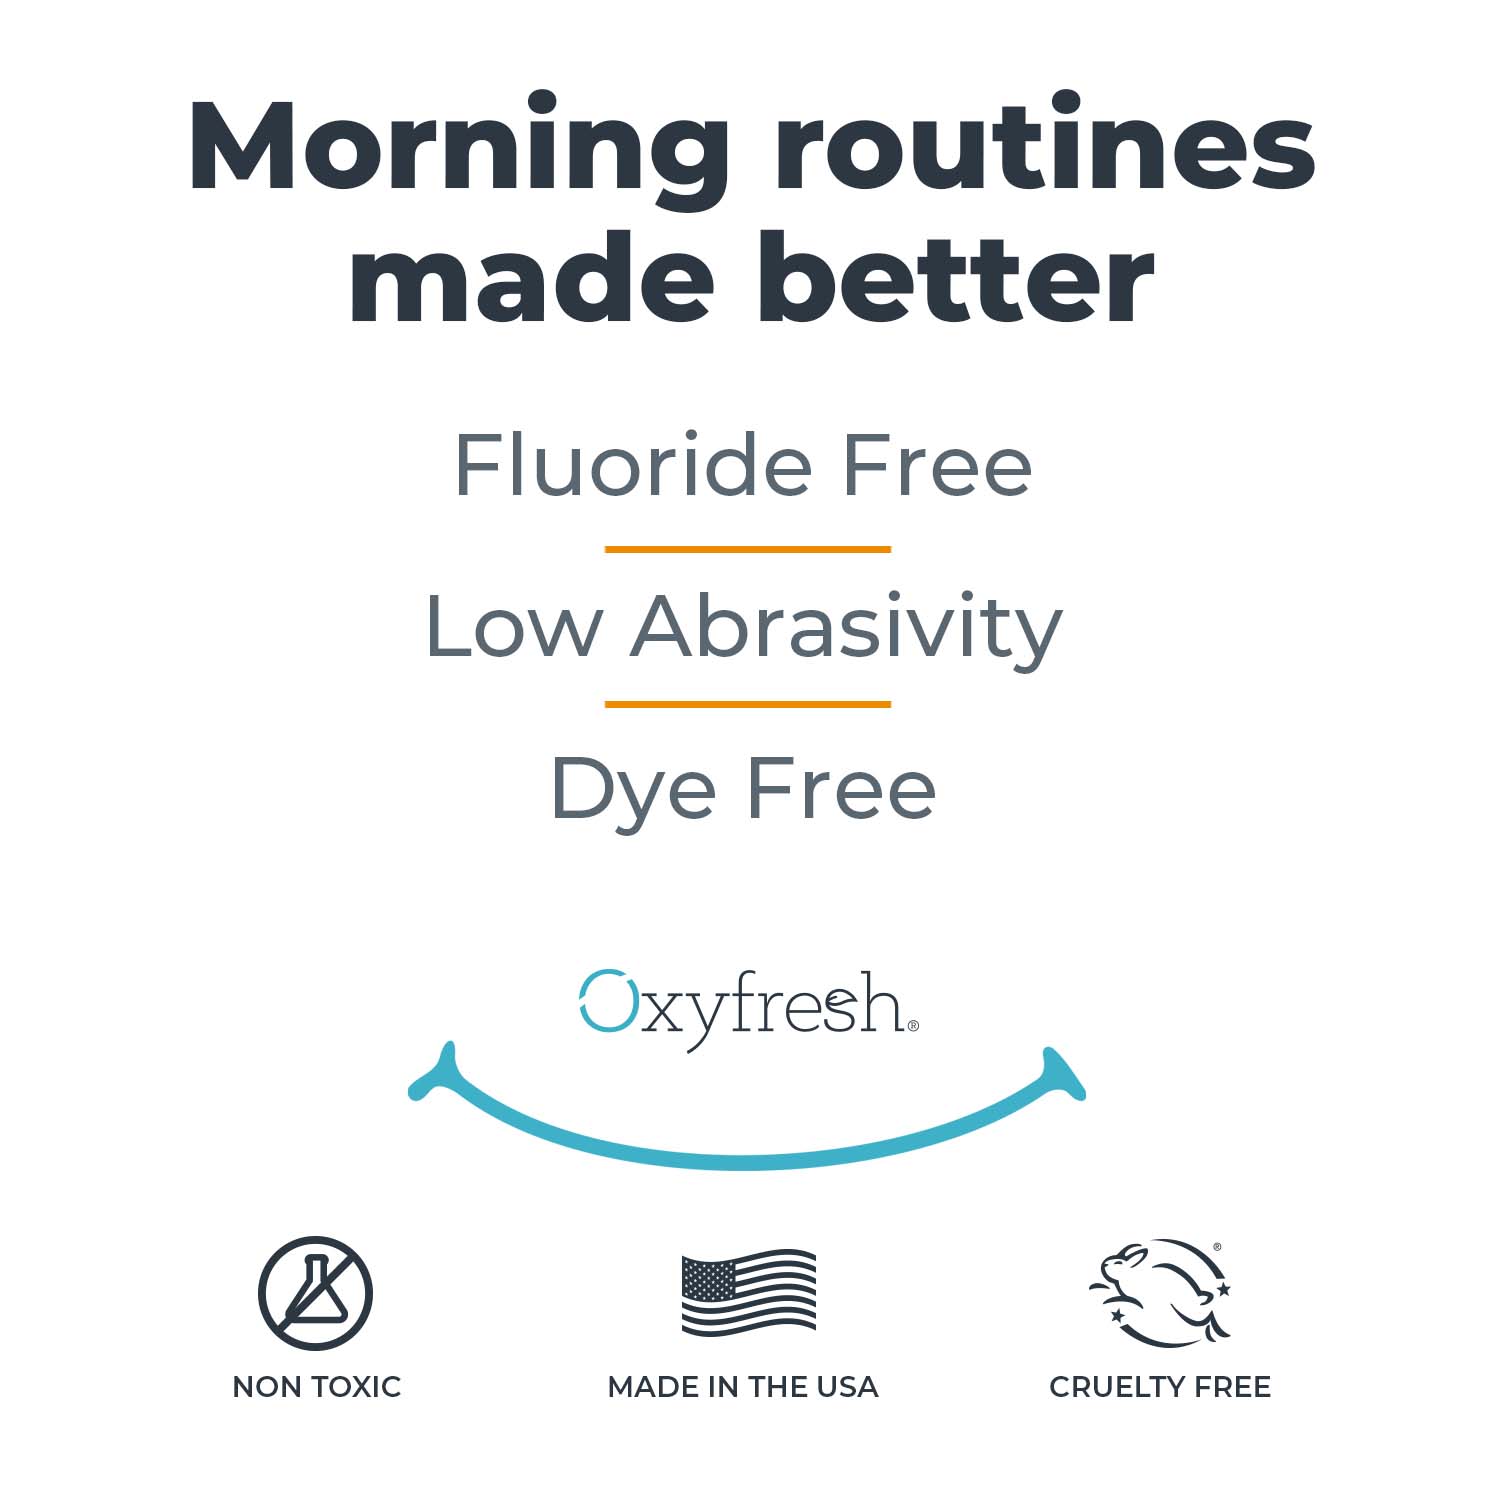 oxyfresh-pro-formula-toothpaste-morning-routines-made-better-fluoride-free-low-abrasivity-and-dye-free